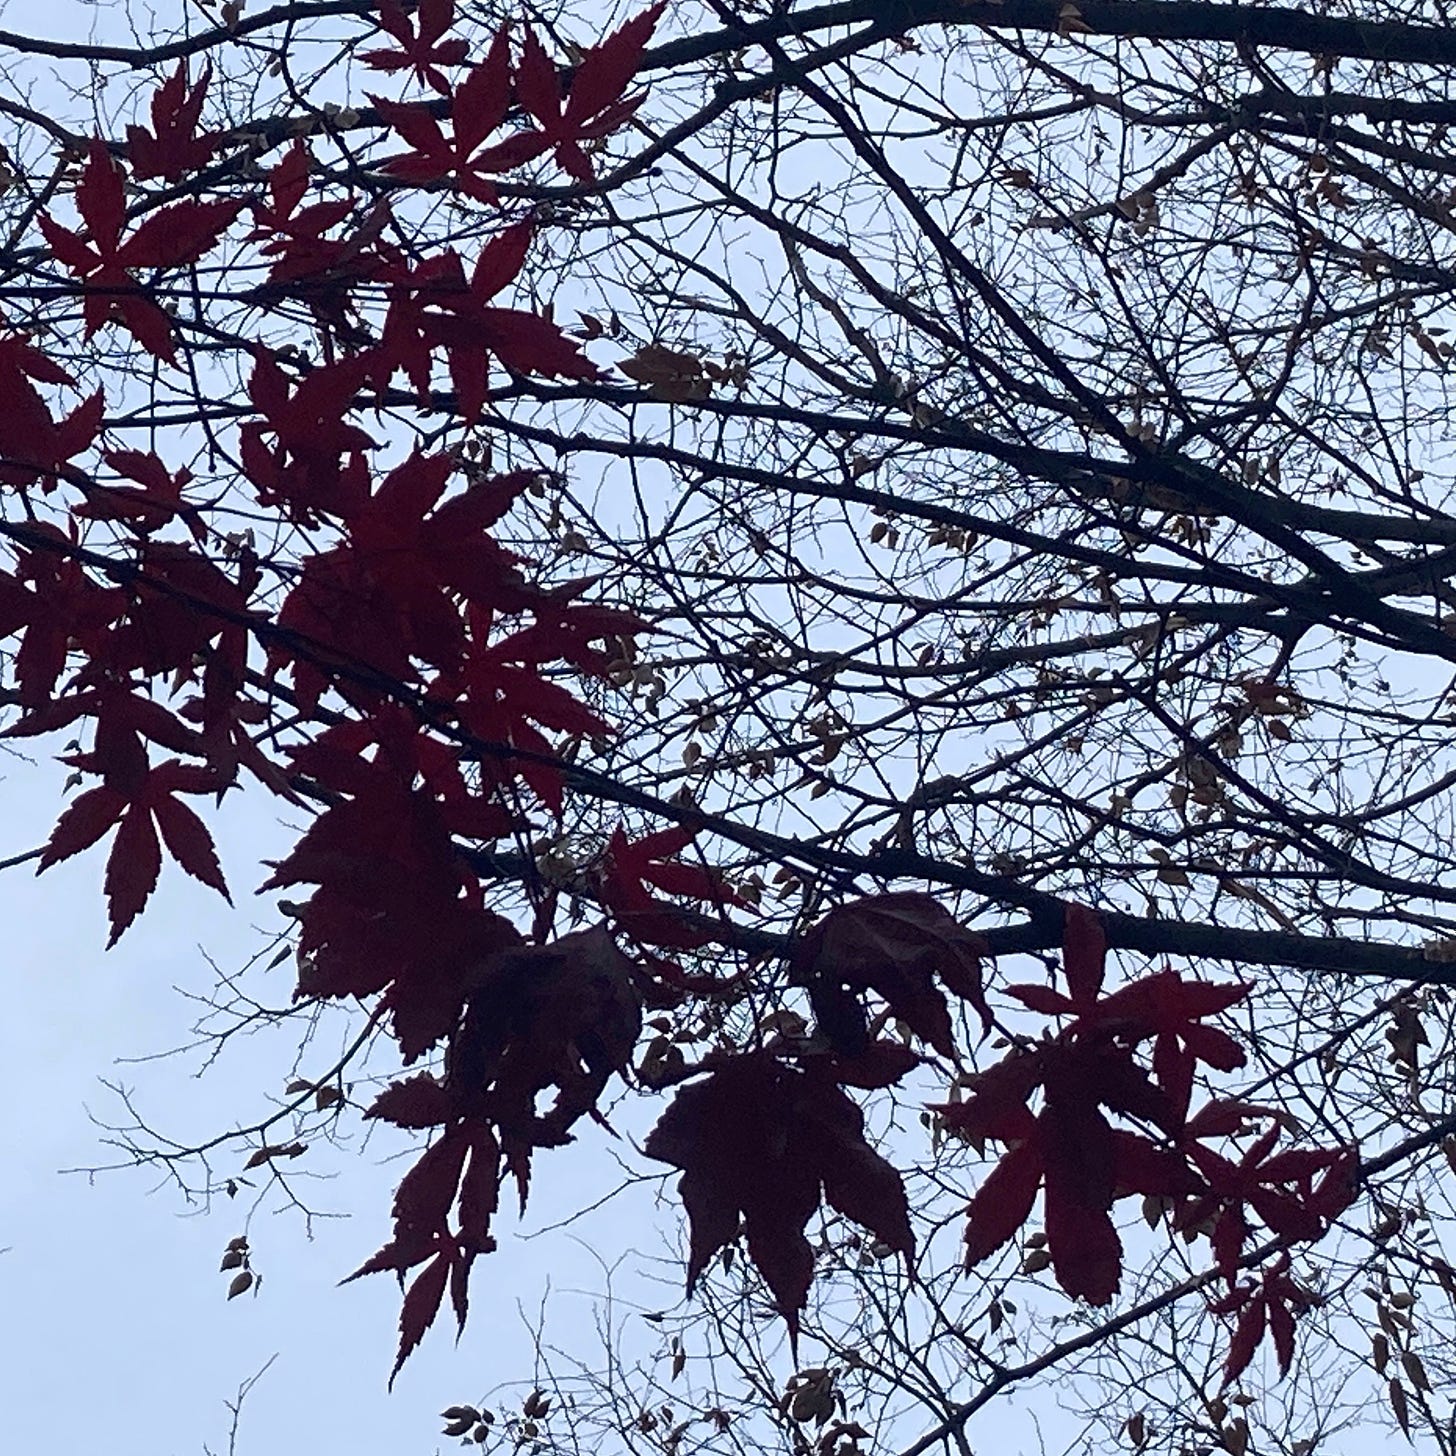 red maple leaves and bare branches silhouetted against the sky